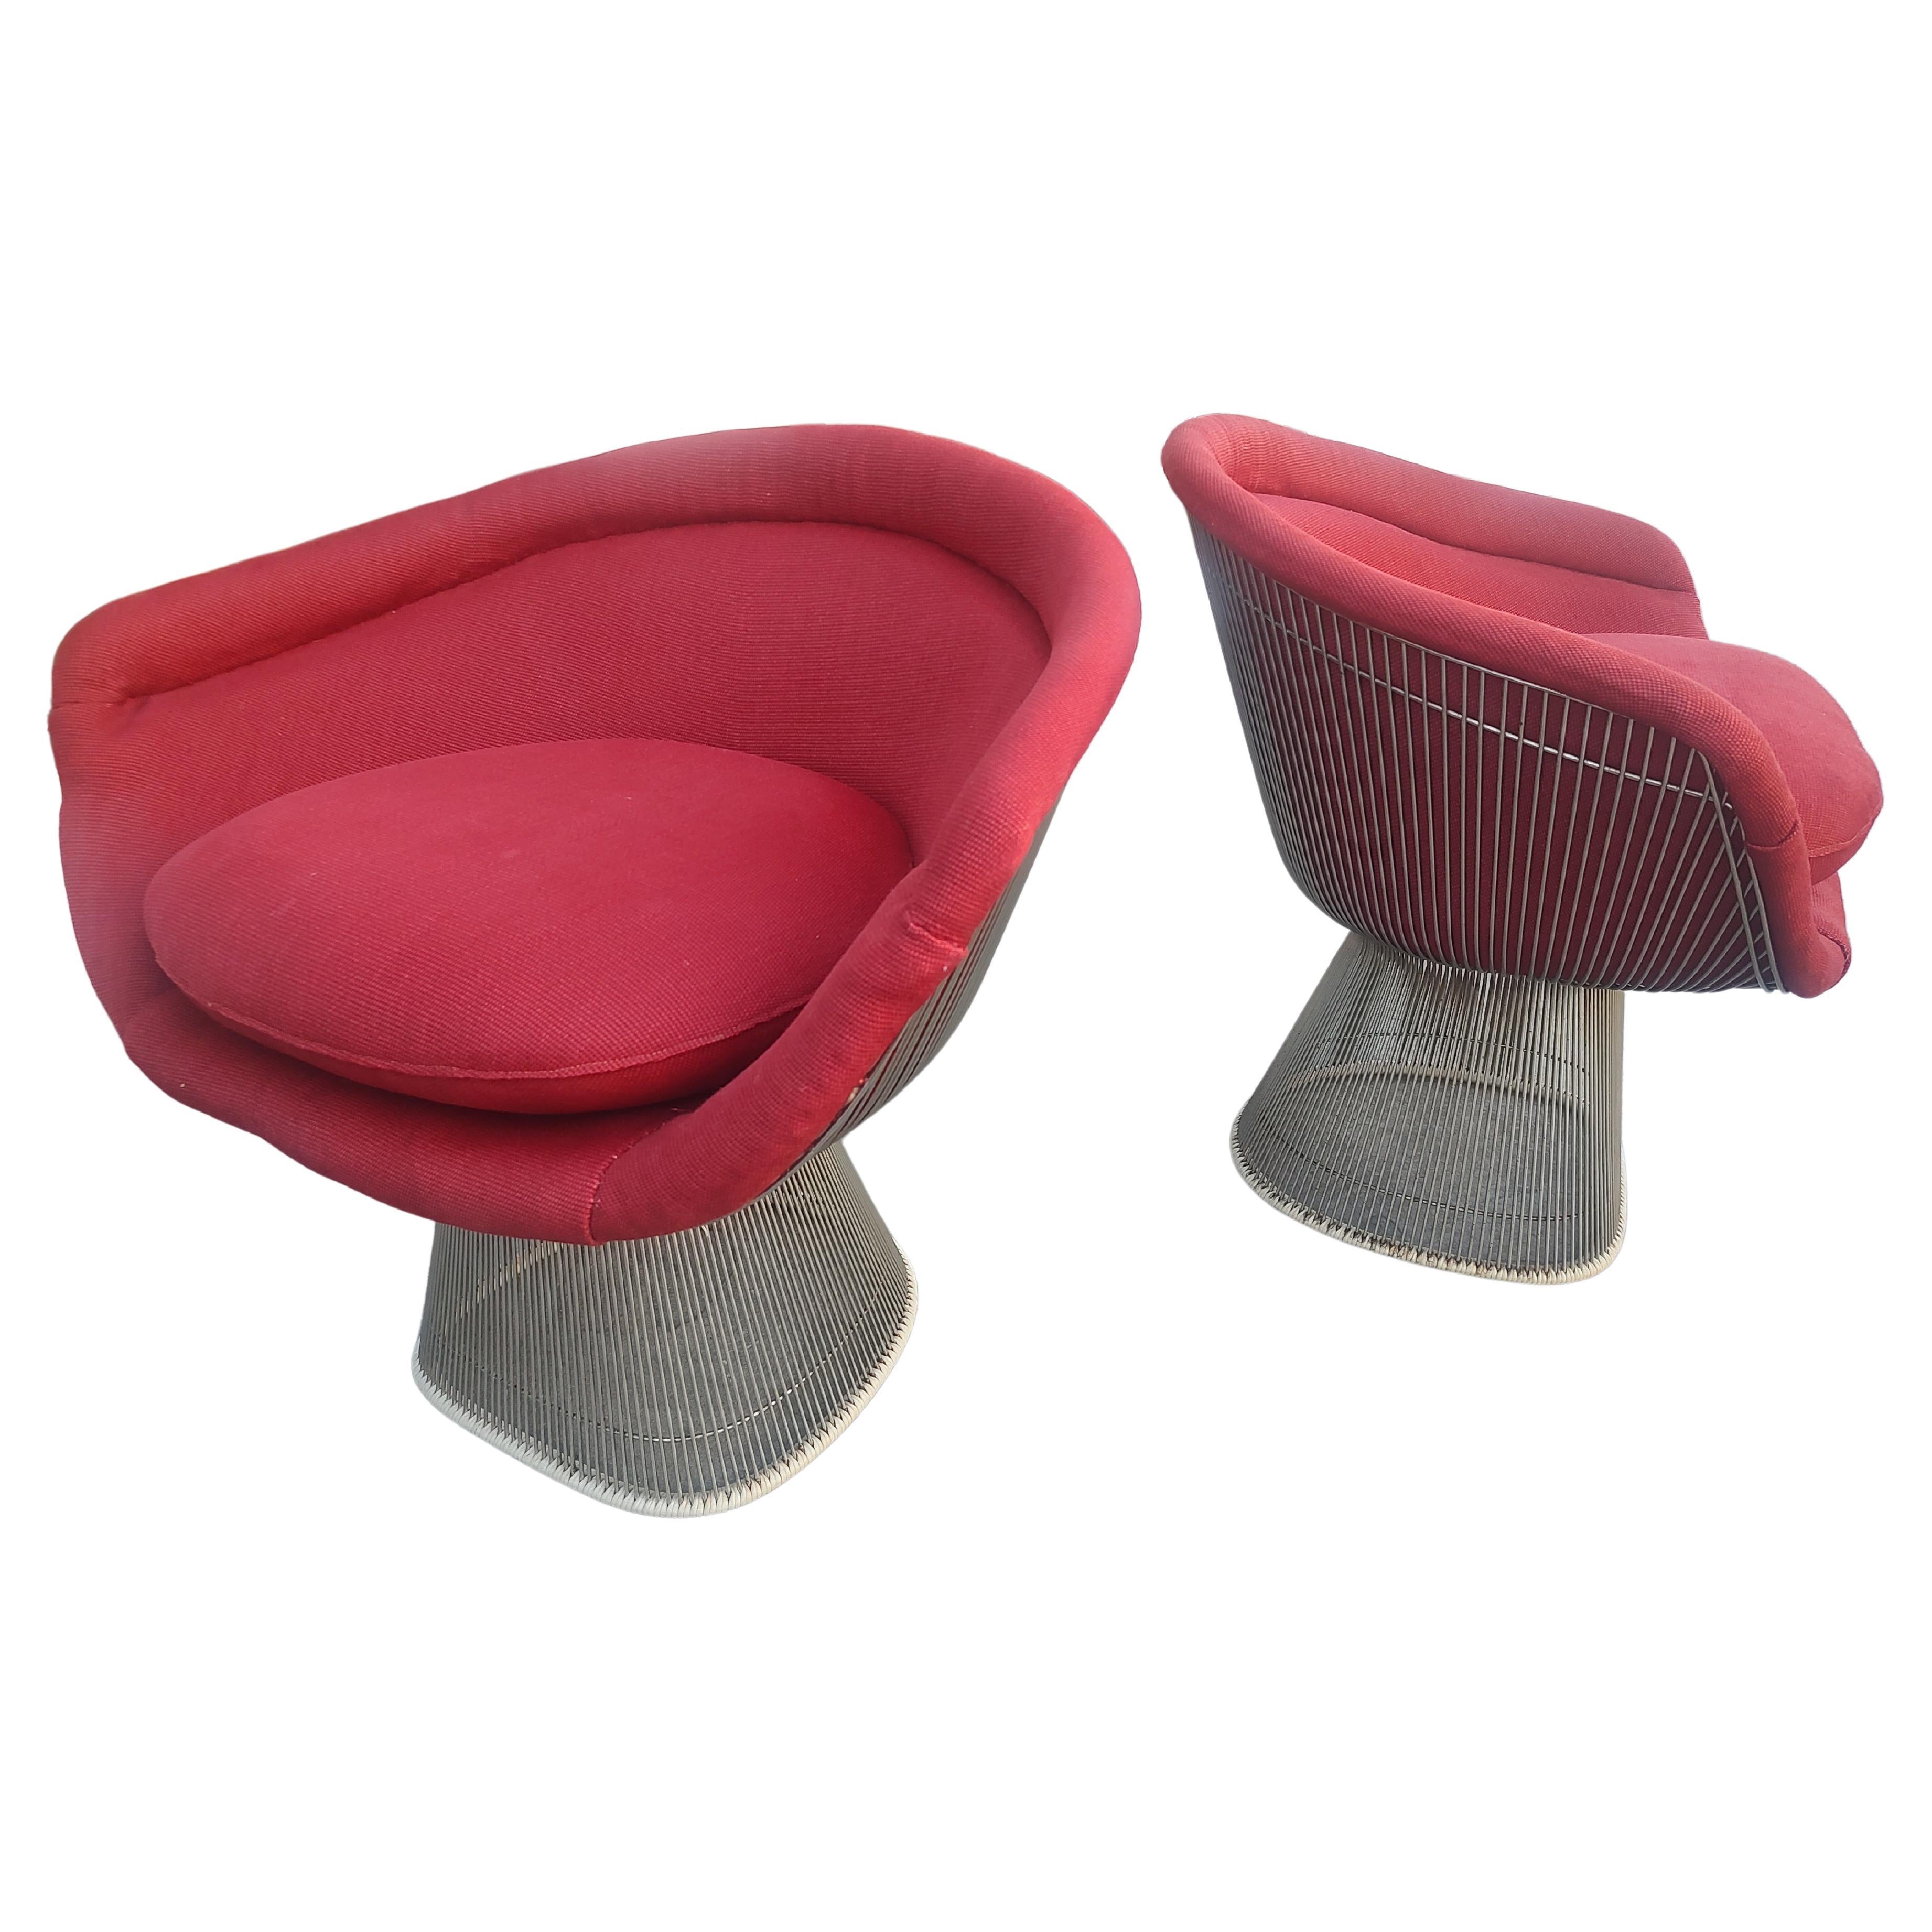 Pair of Warren Platner Mid Century Modern Lounge Chairs for Knoll C1965